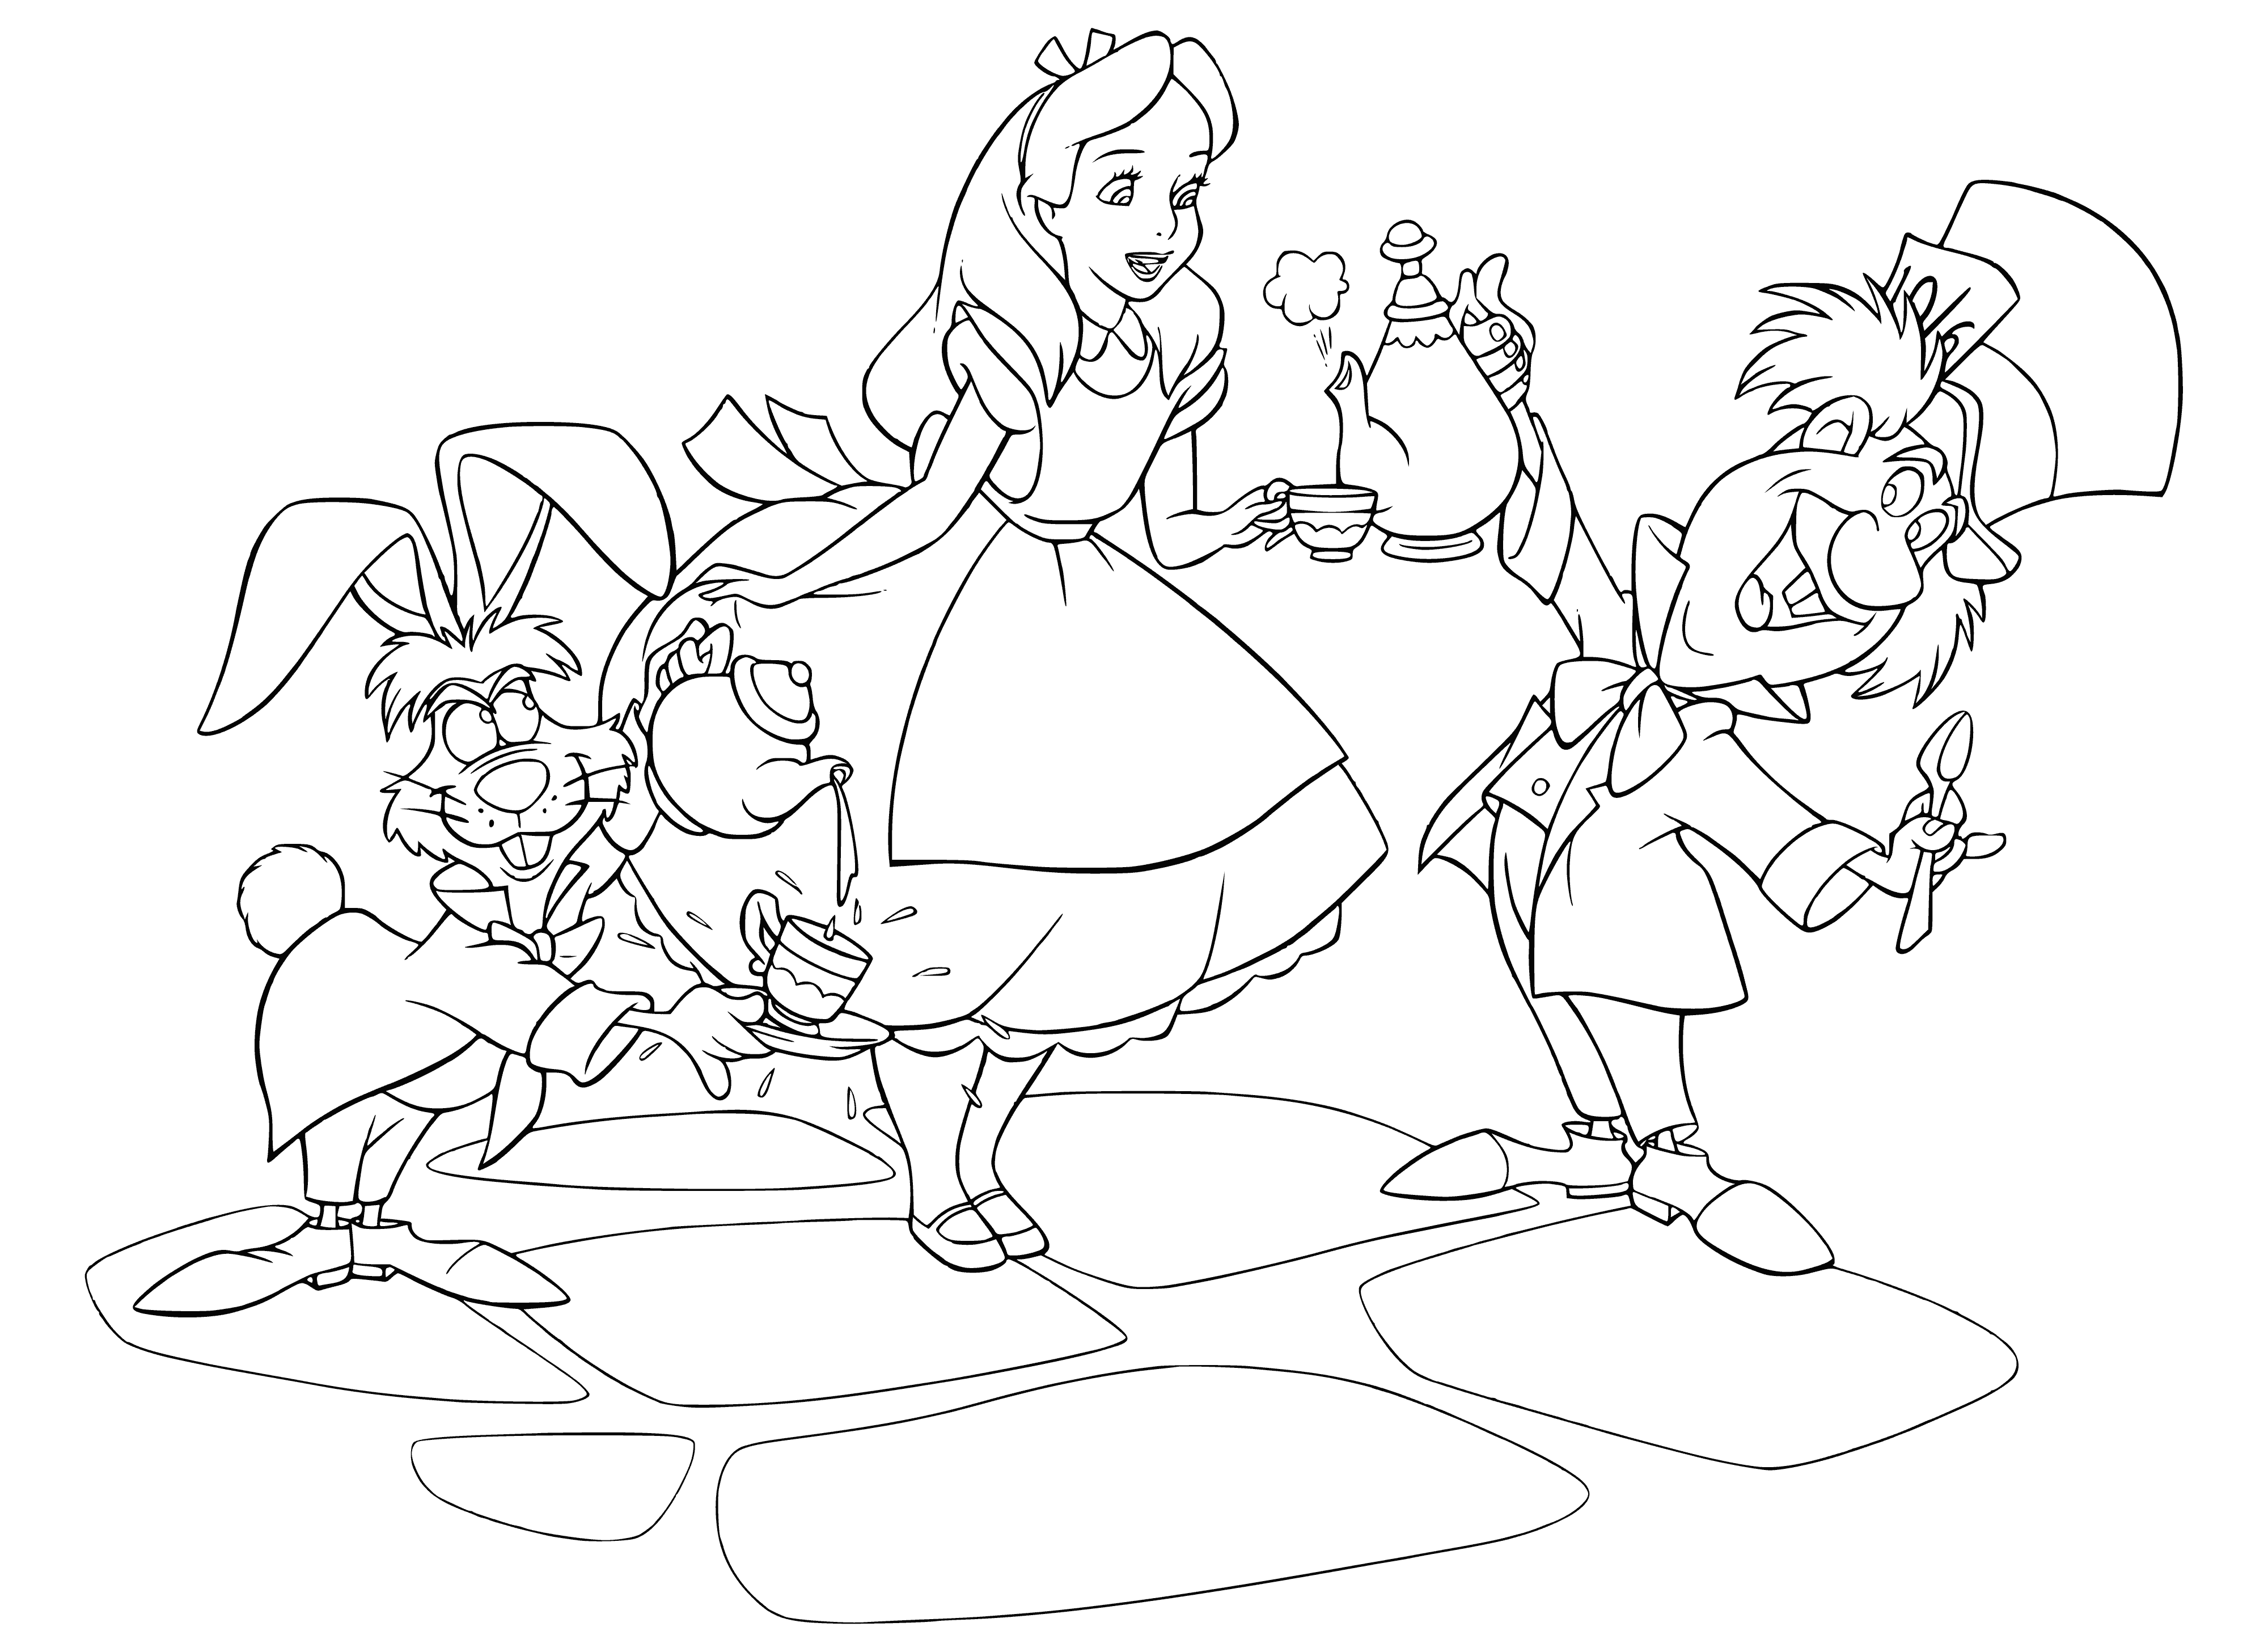 coloring page: Alice, Hatter & March Hare at a tea table. Alice looks curious, Hatter mad as March Hare pours tea.